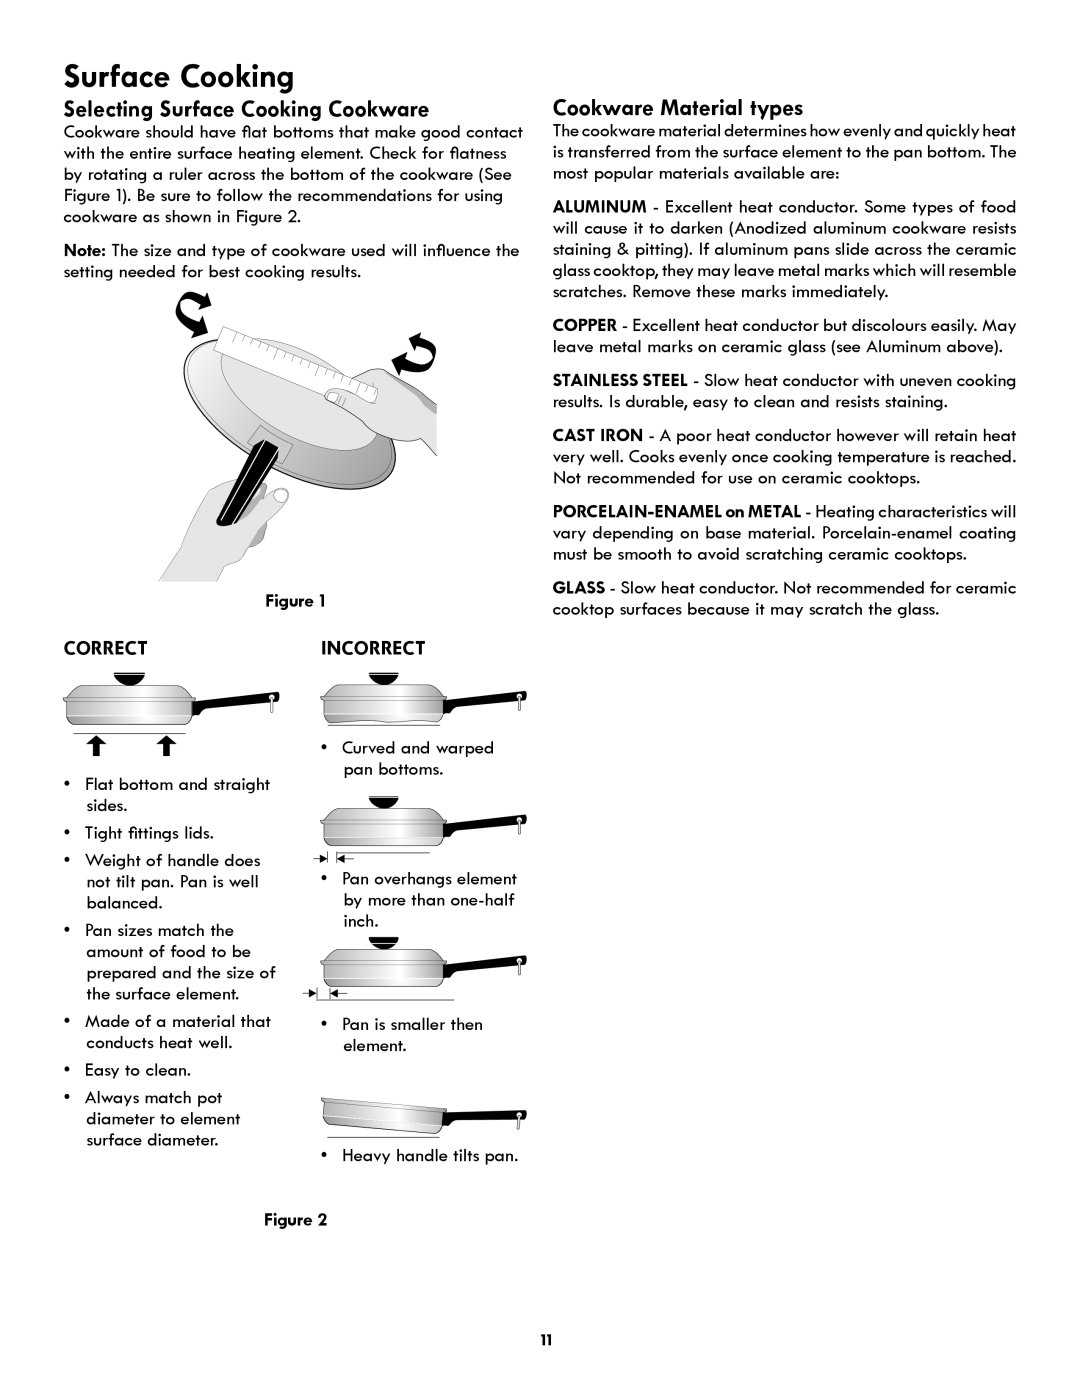 Kenmore PN 318205824A -1012 Selecting Surface Cooking Cookware, Cookware Material types, CorrectINCorrect 